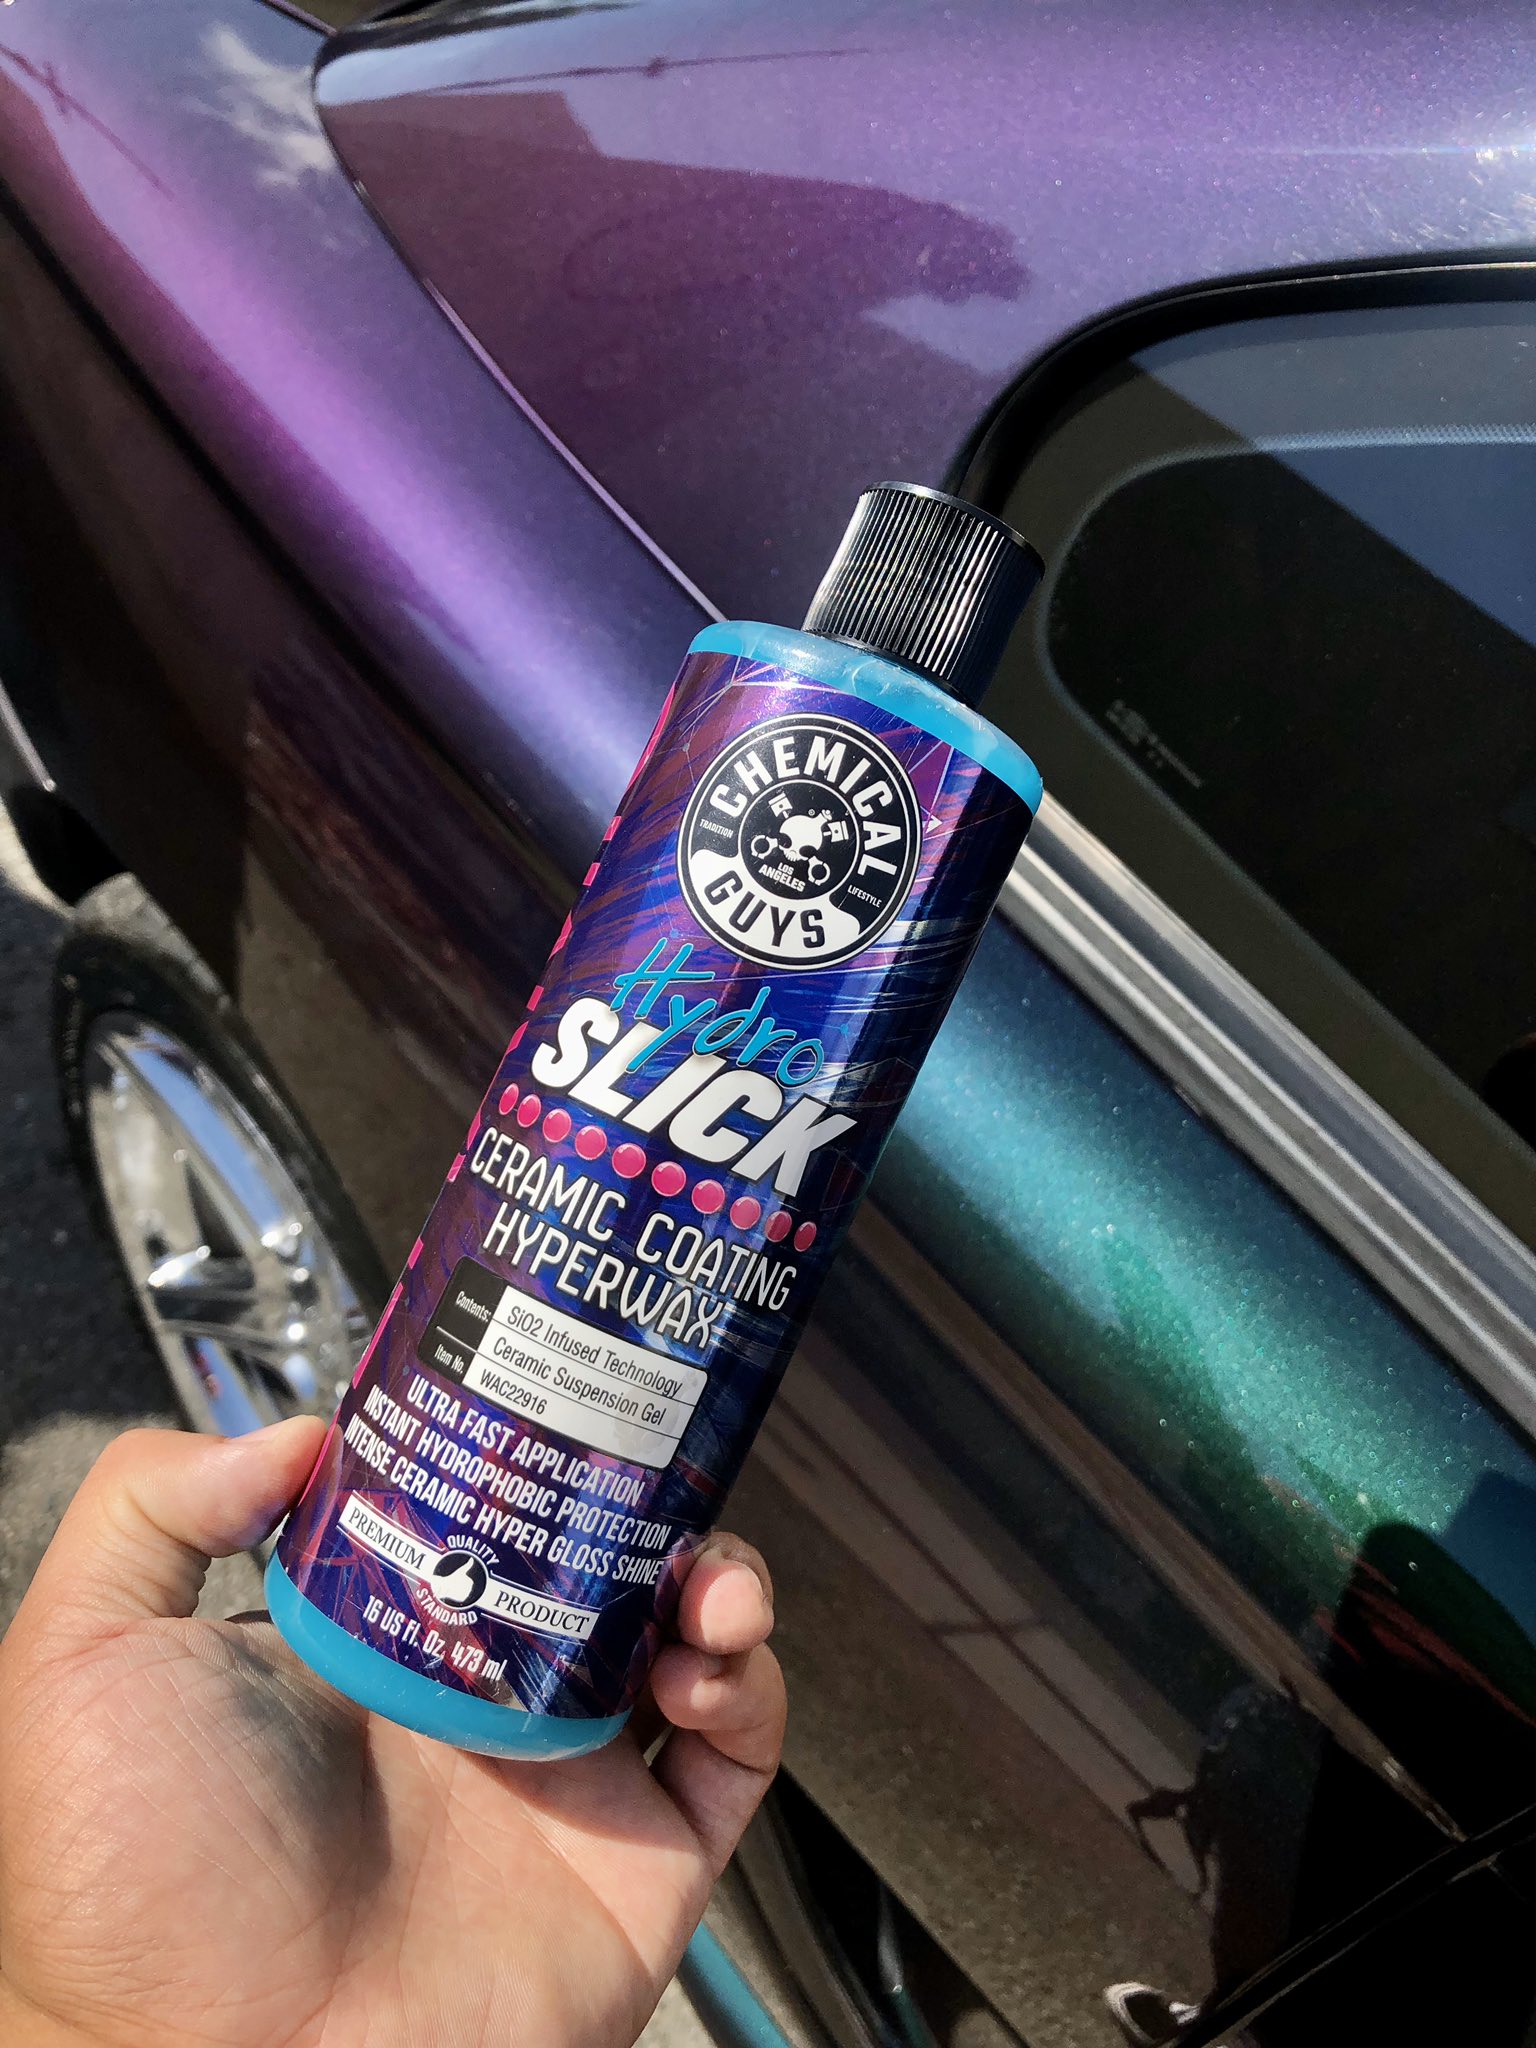 Chemical Guys on X: Have you tried Hydroslick yet? If not it is now back  in stock! Check out this crazy shine and reflection just sent in: “Check  out this amazing shine